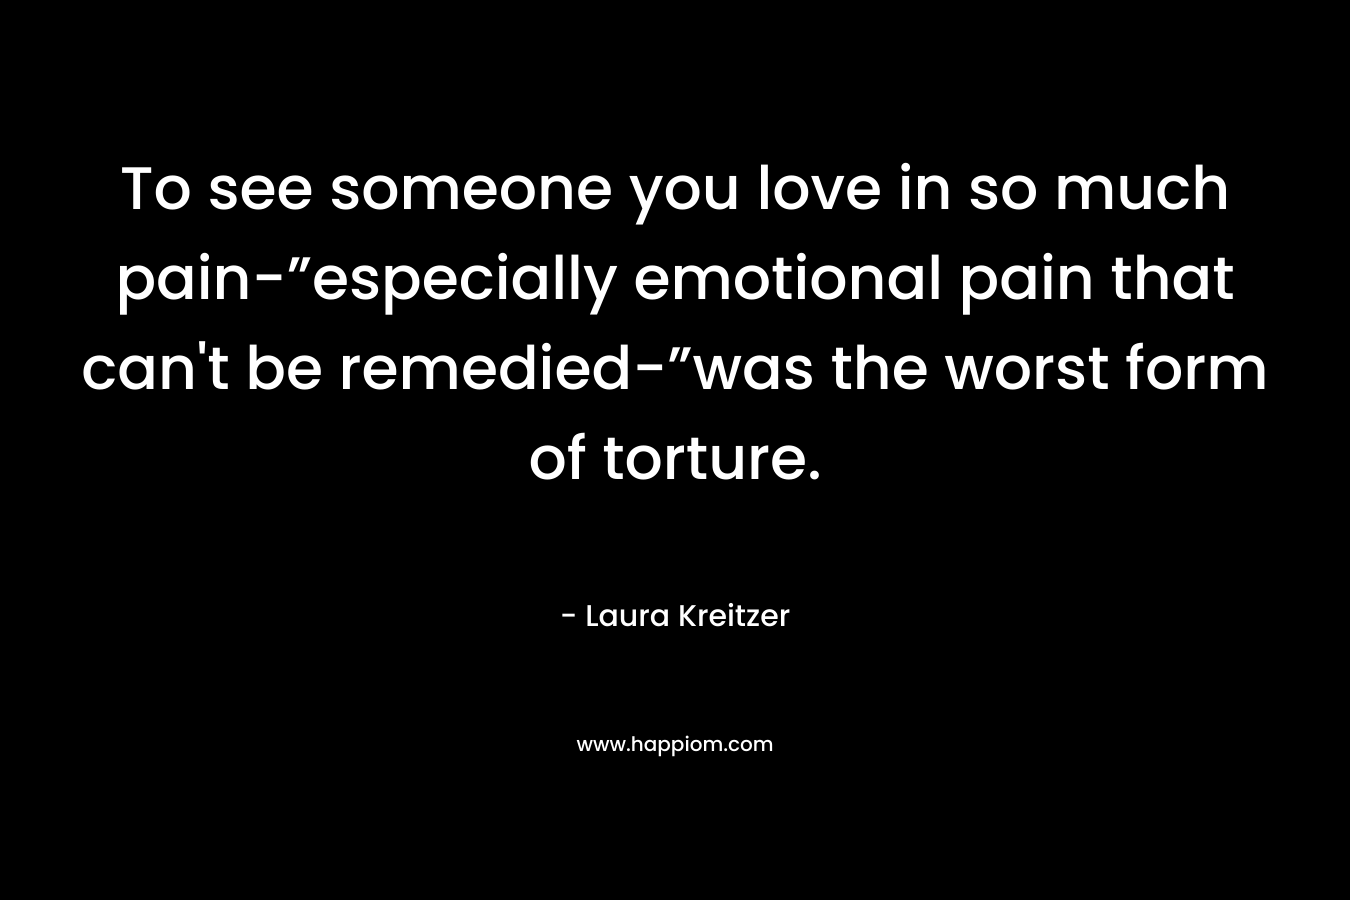 To see someone you love in so much pain-”especially emotional pain that can’t be remedied-”was the worst form of torture. – Laura Kreitzer